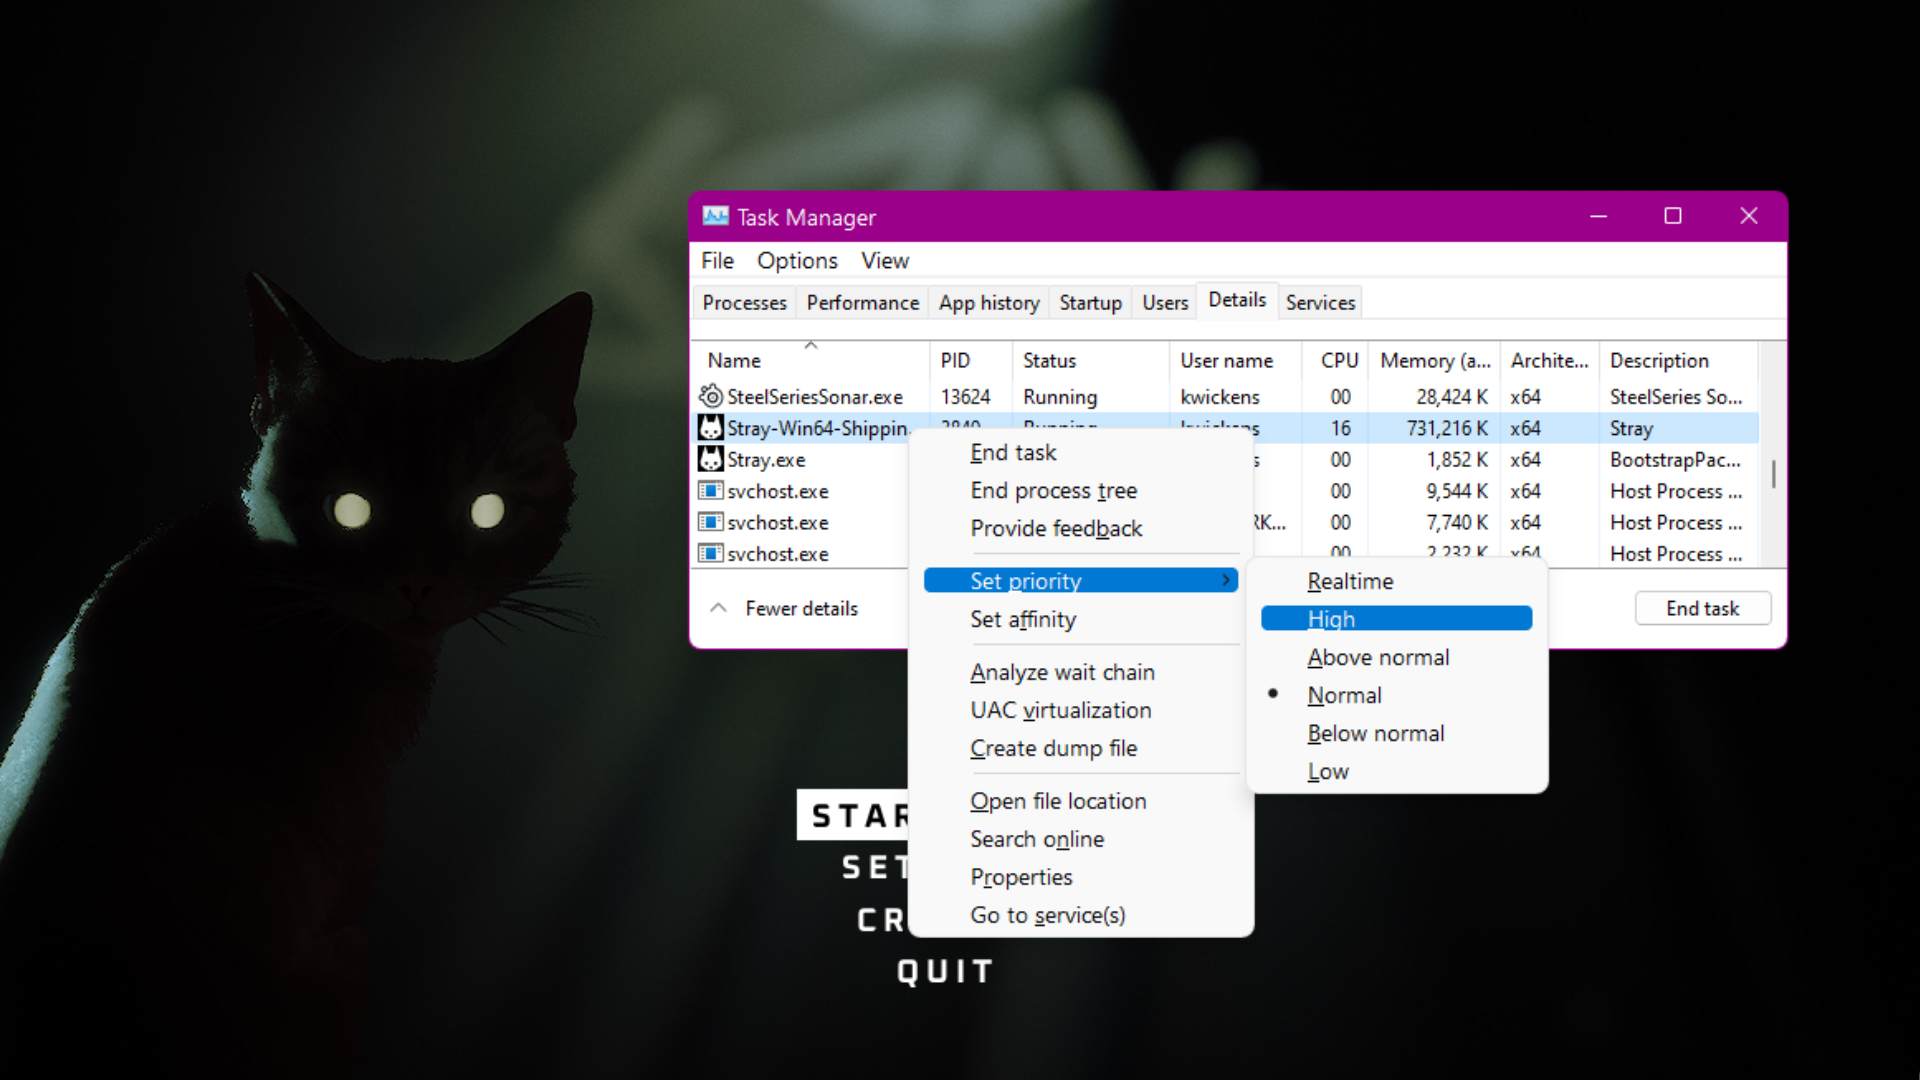 The Task manager open changing the priority of Stray.